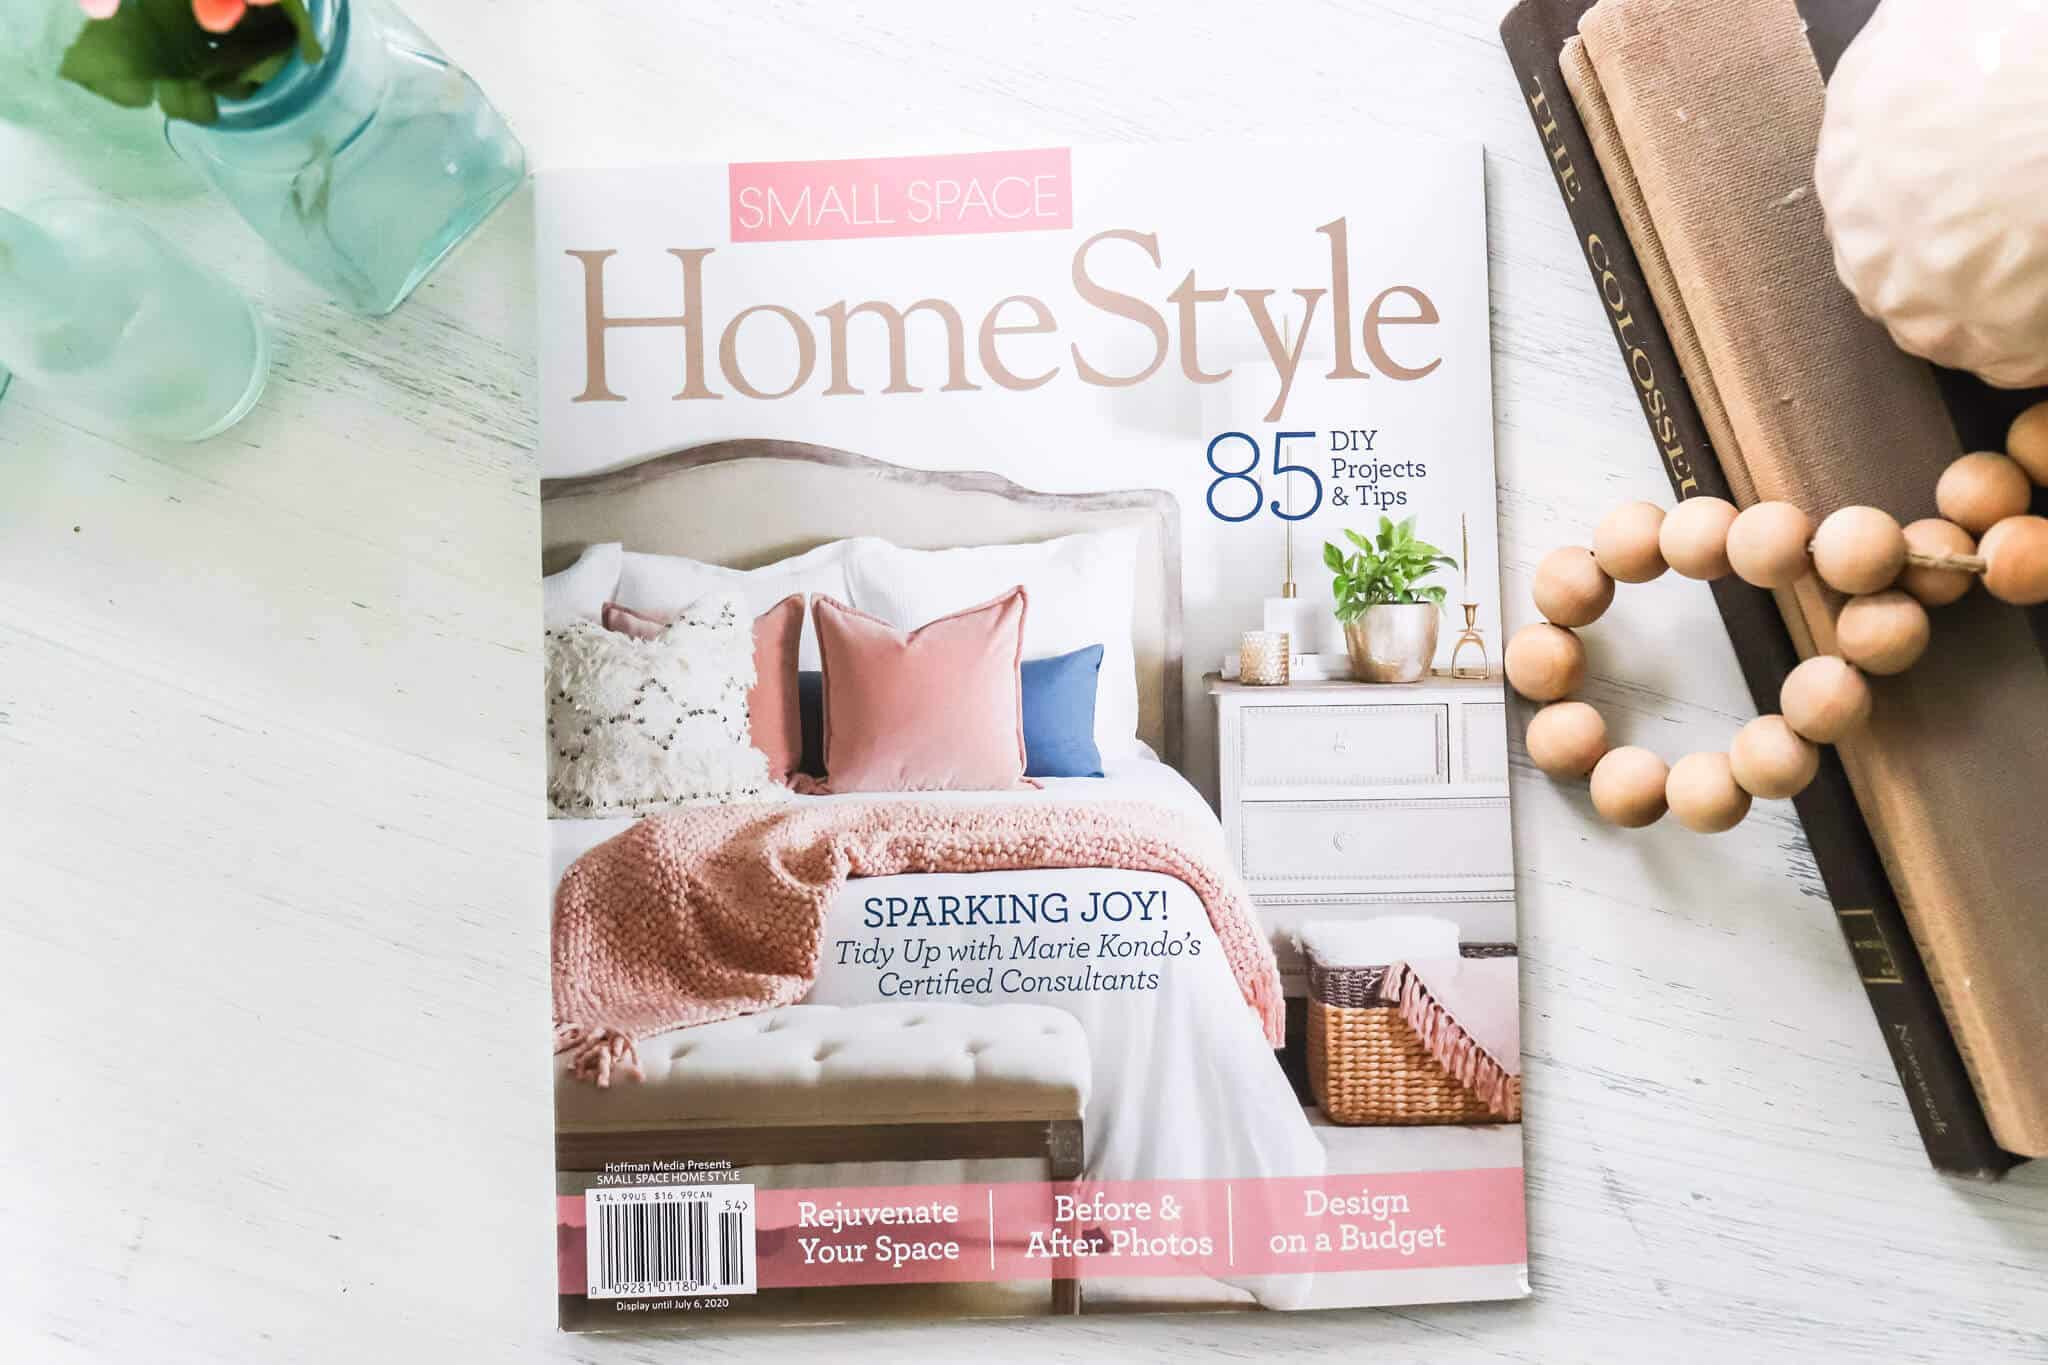 Small Space Homestyle Magazine sitting on a table